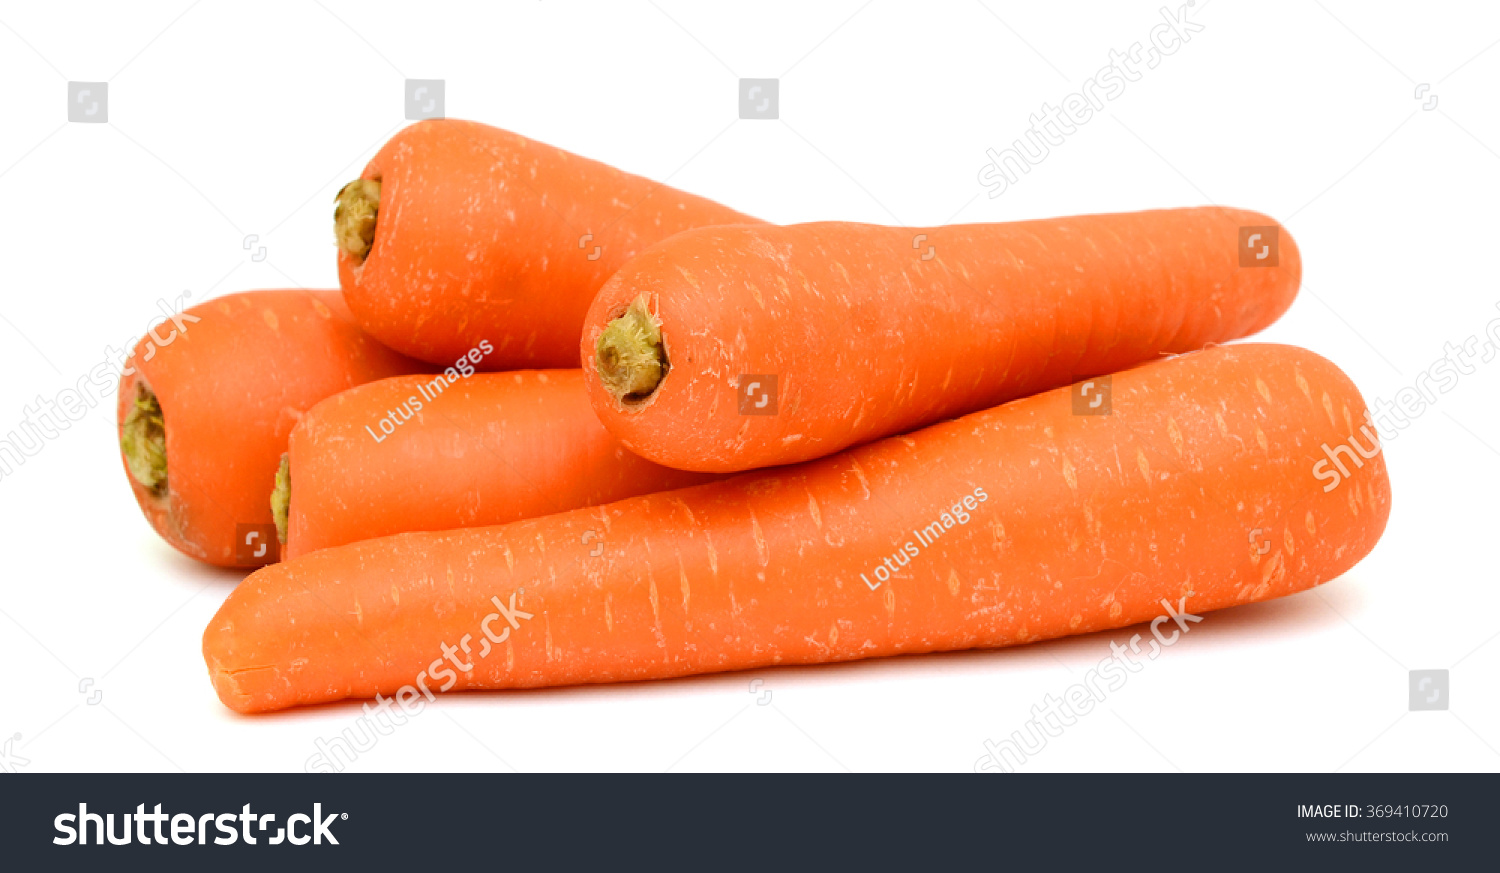 Carrots isolated on white background #369410720